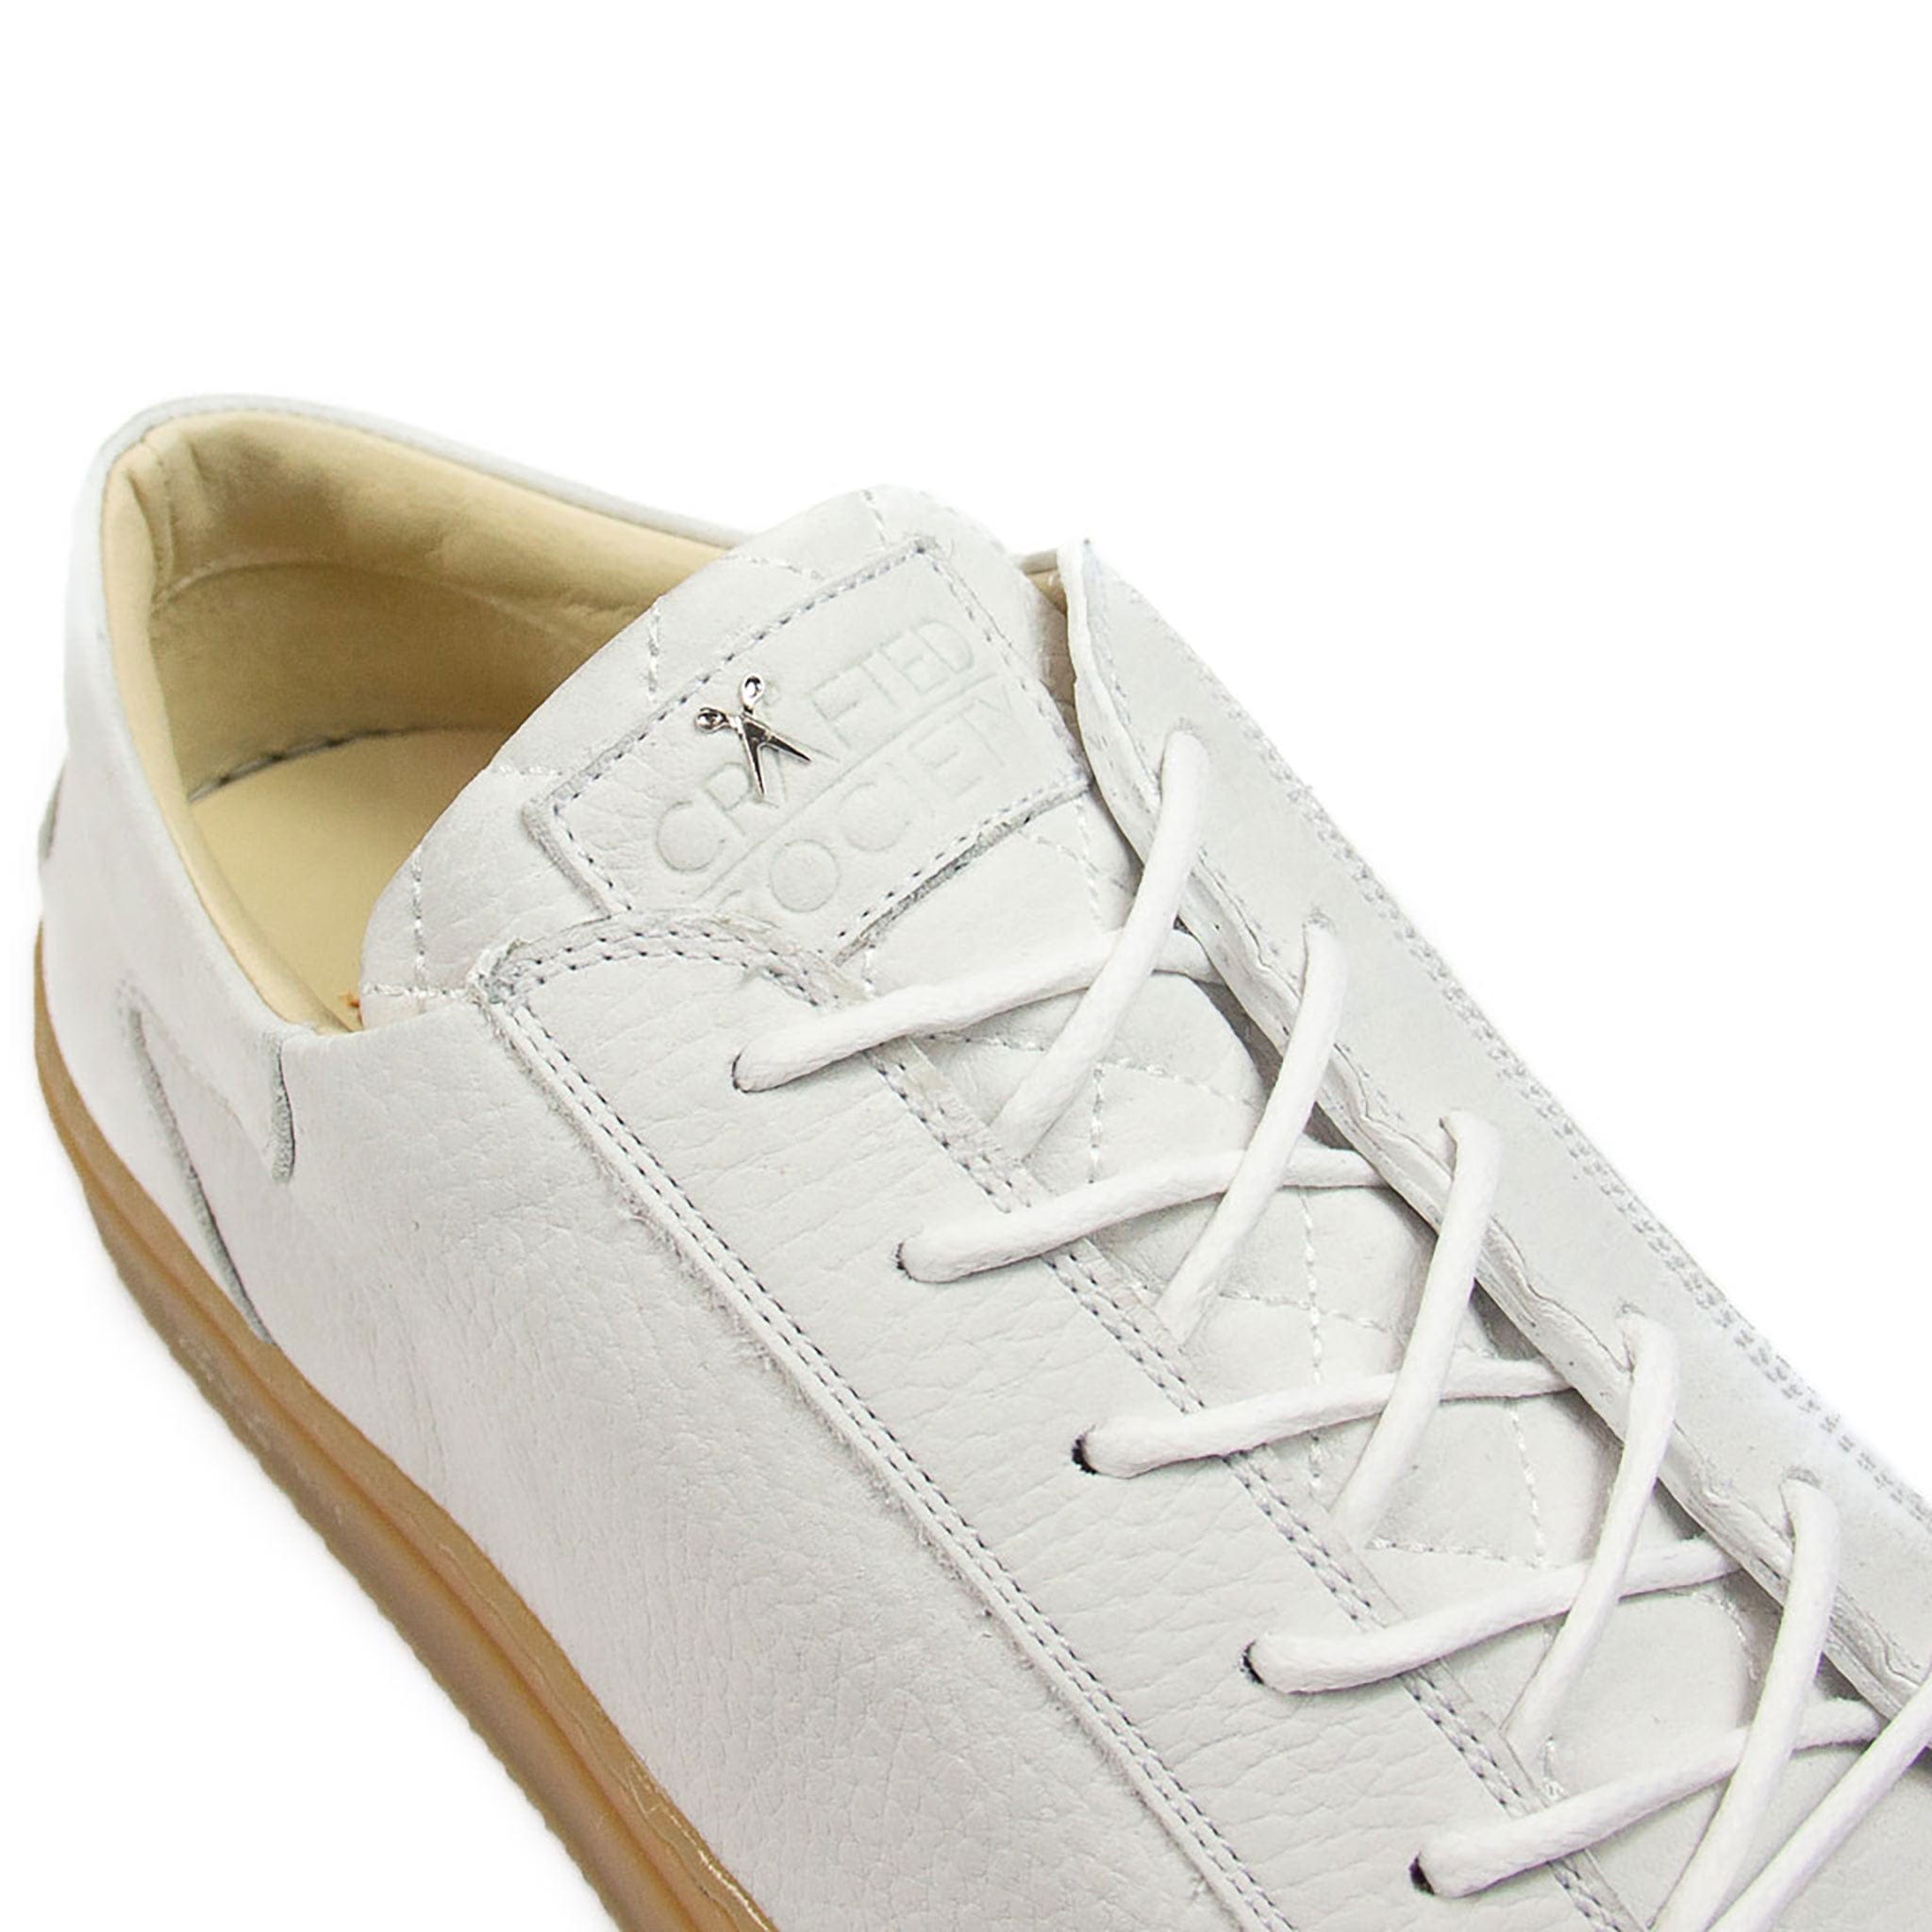 Mario Low Refined Sneaker | White Nubuck | Gum Rubber Outsole | Made in Italy